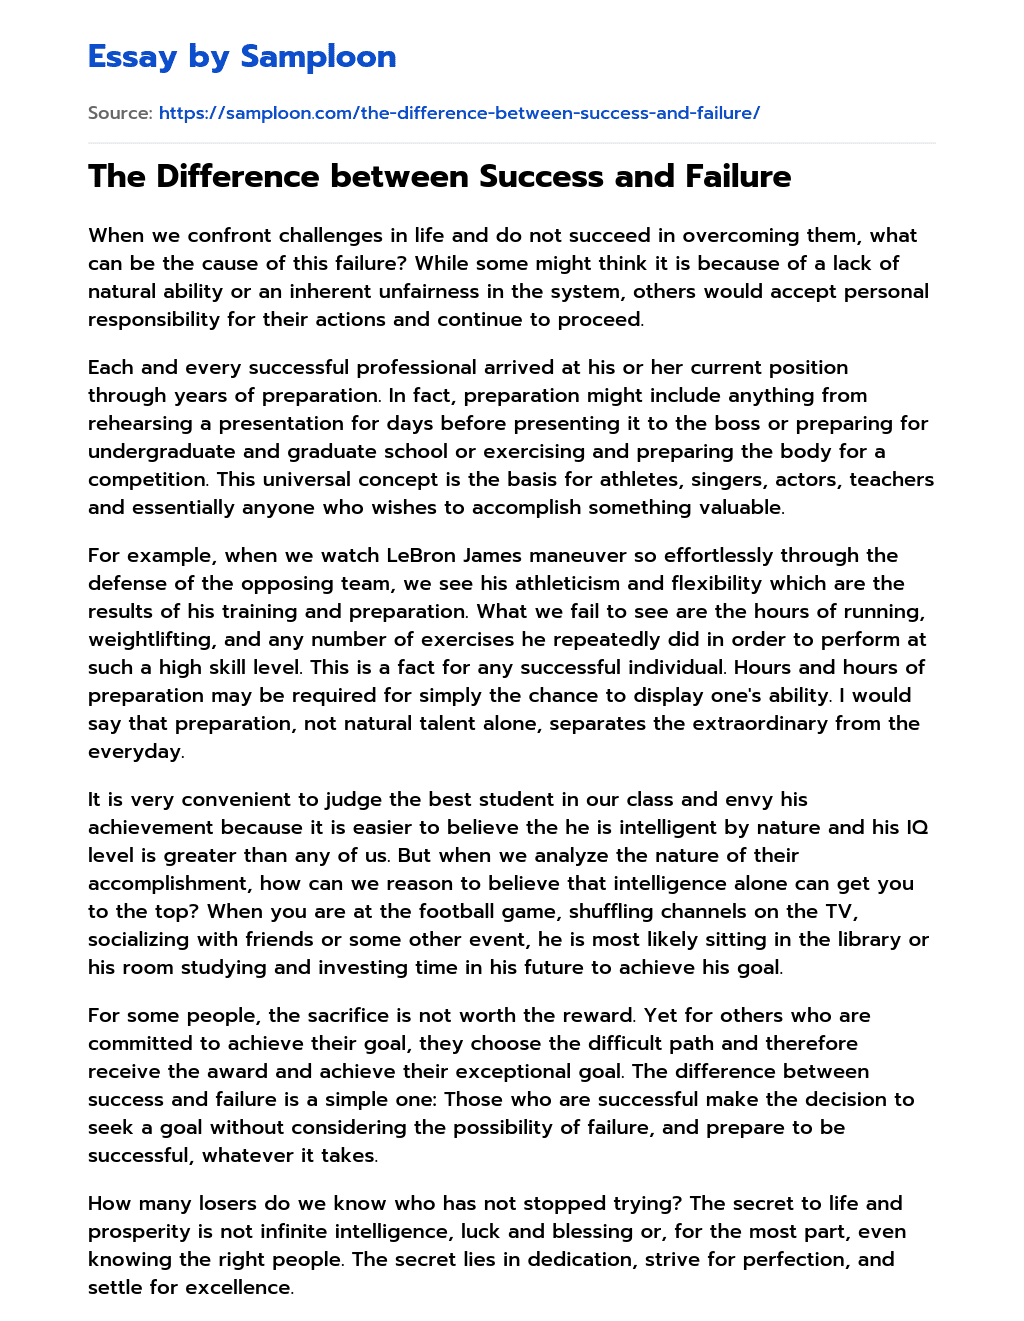 The Difference between Success and Failure essay